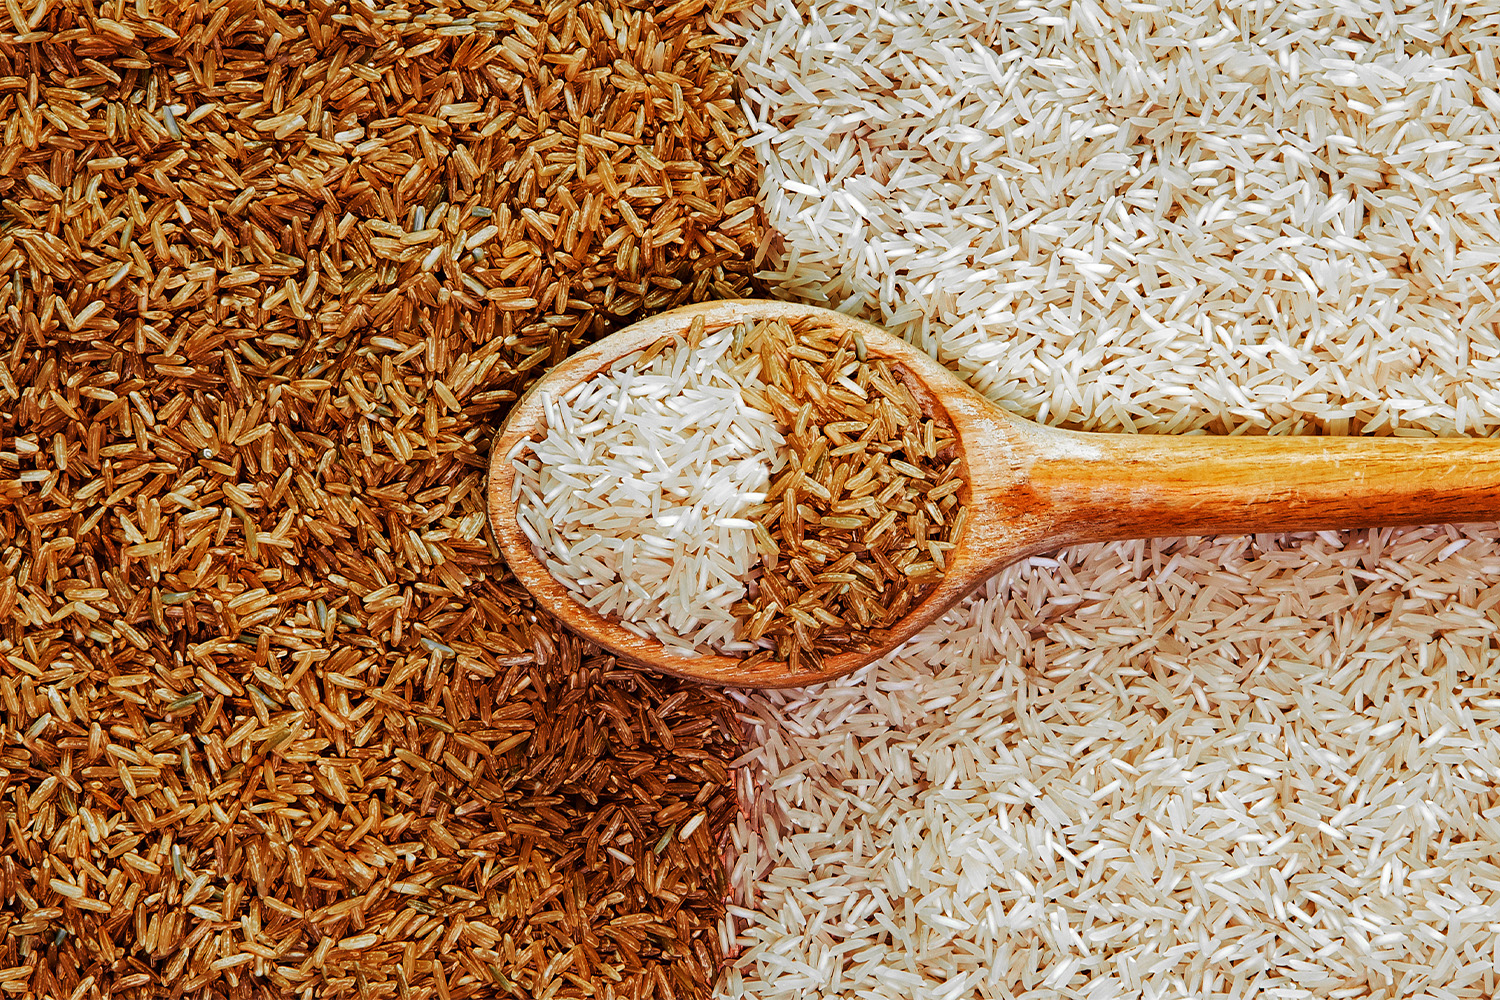 Brown Rice vs. White Rice: Which is Best for Bodybuilding?